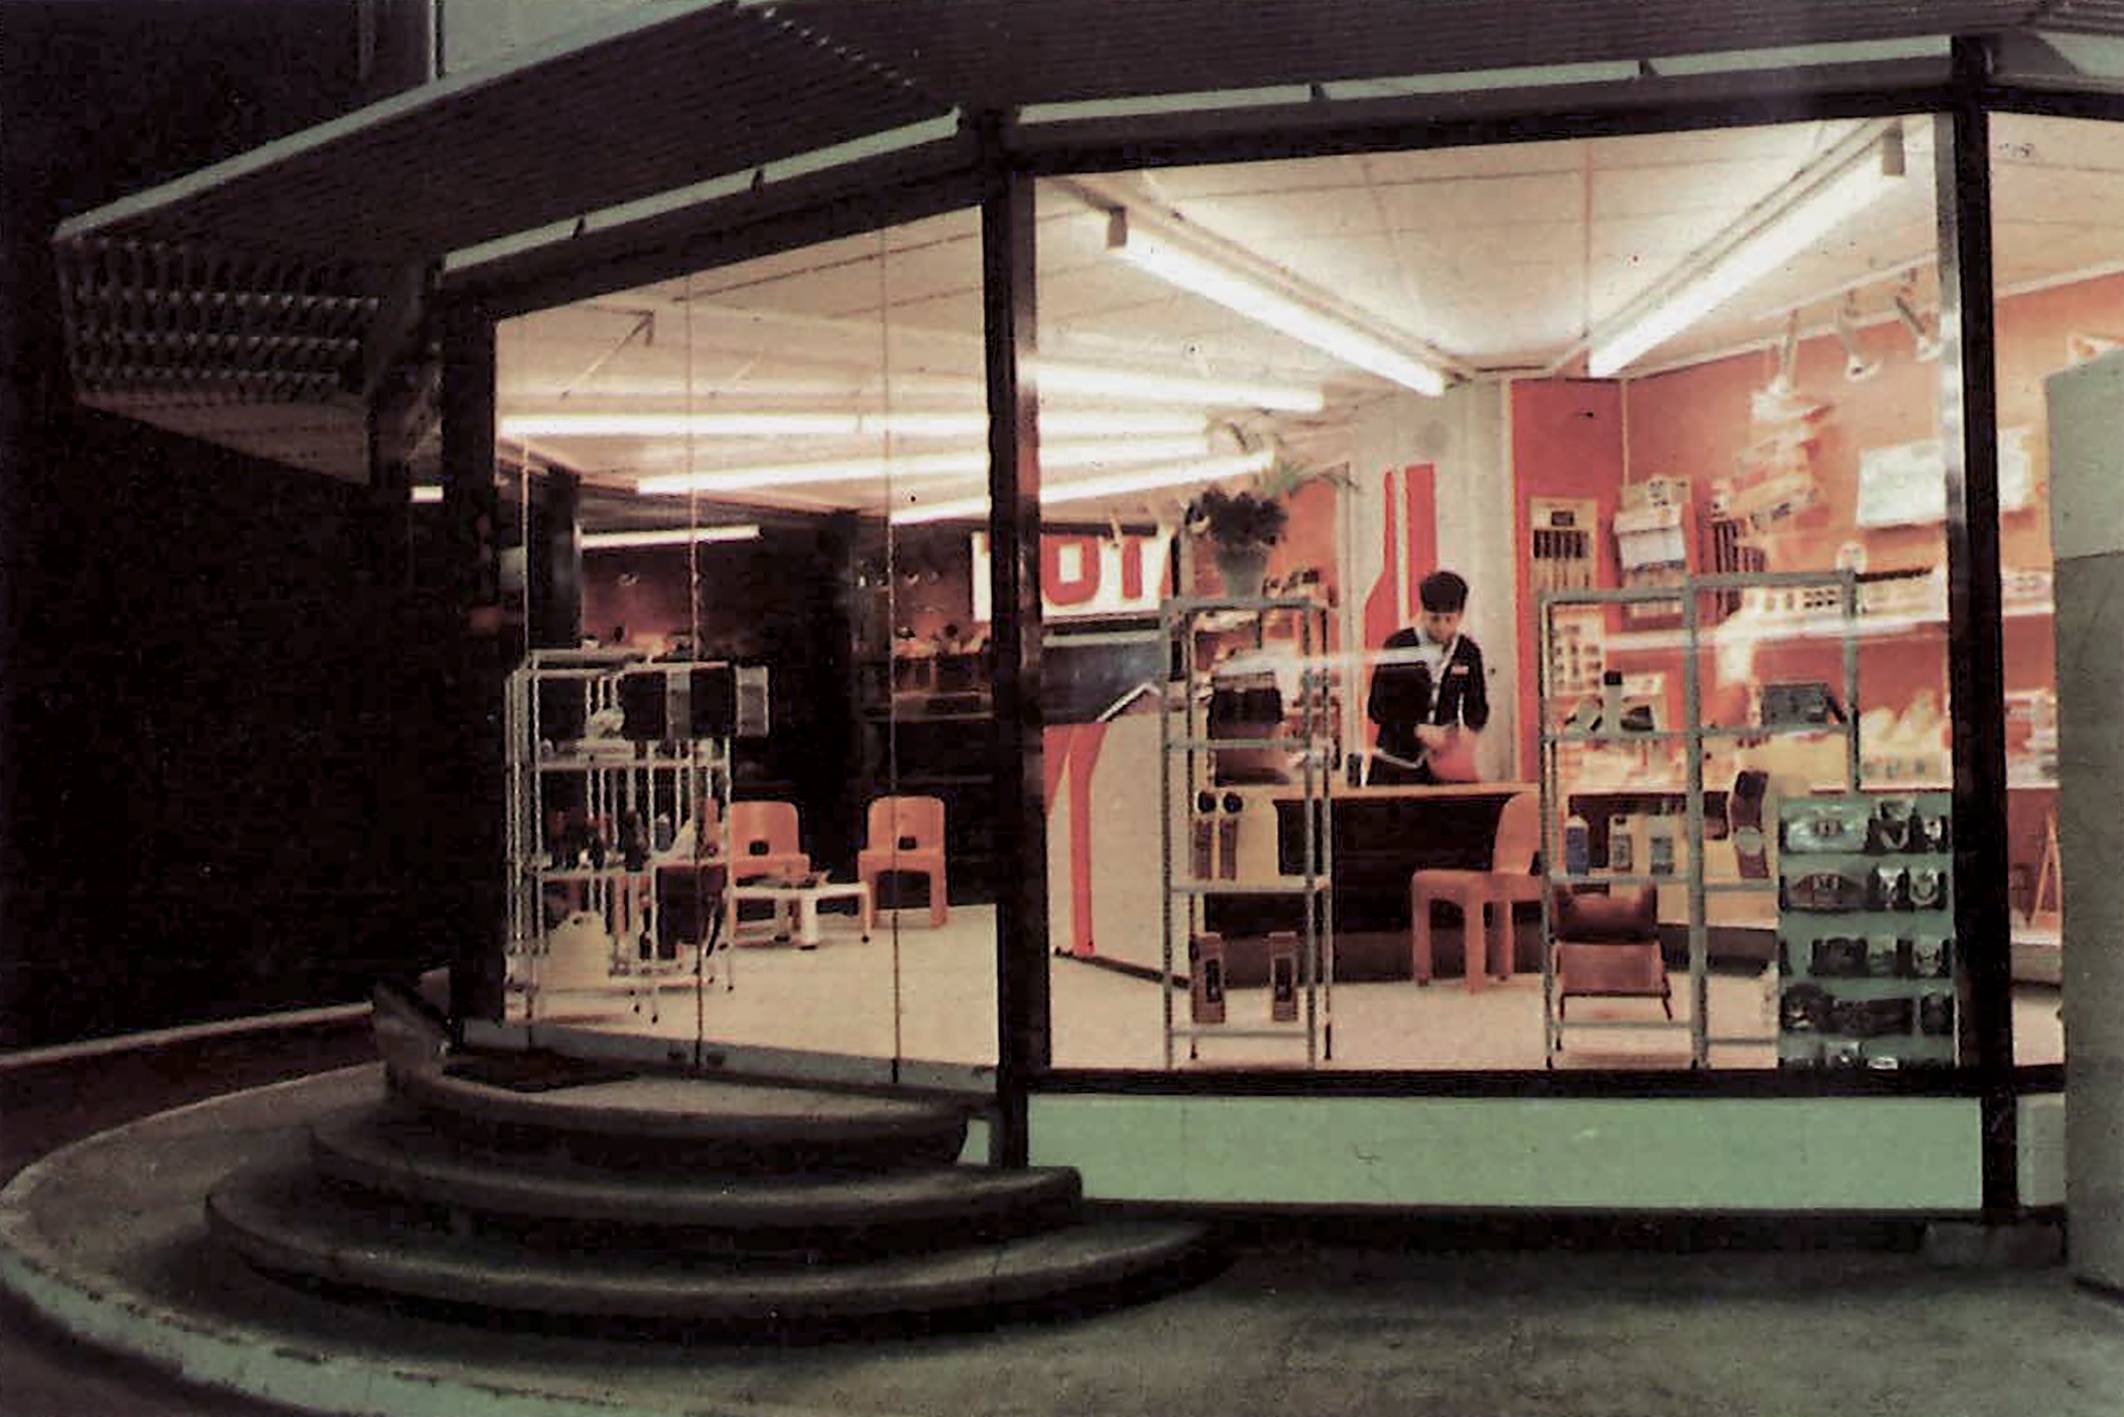 “A new kind of service station”. Photograph in <i>Nouvelles Total</i>, the Total company house journal, no. 46, April 1970.